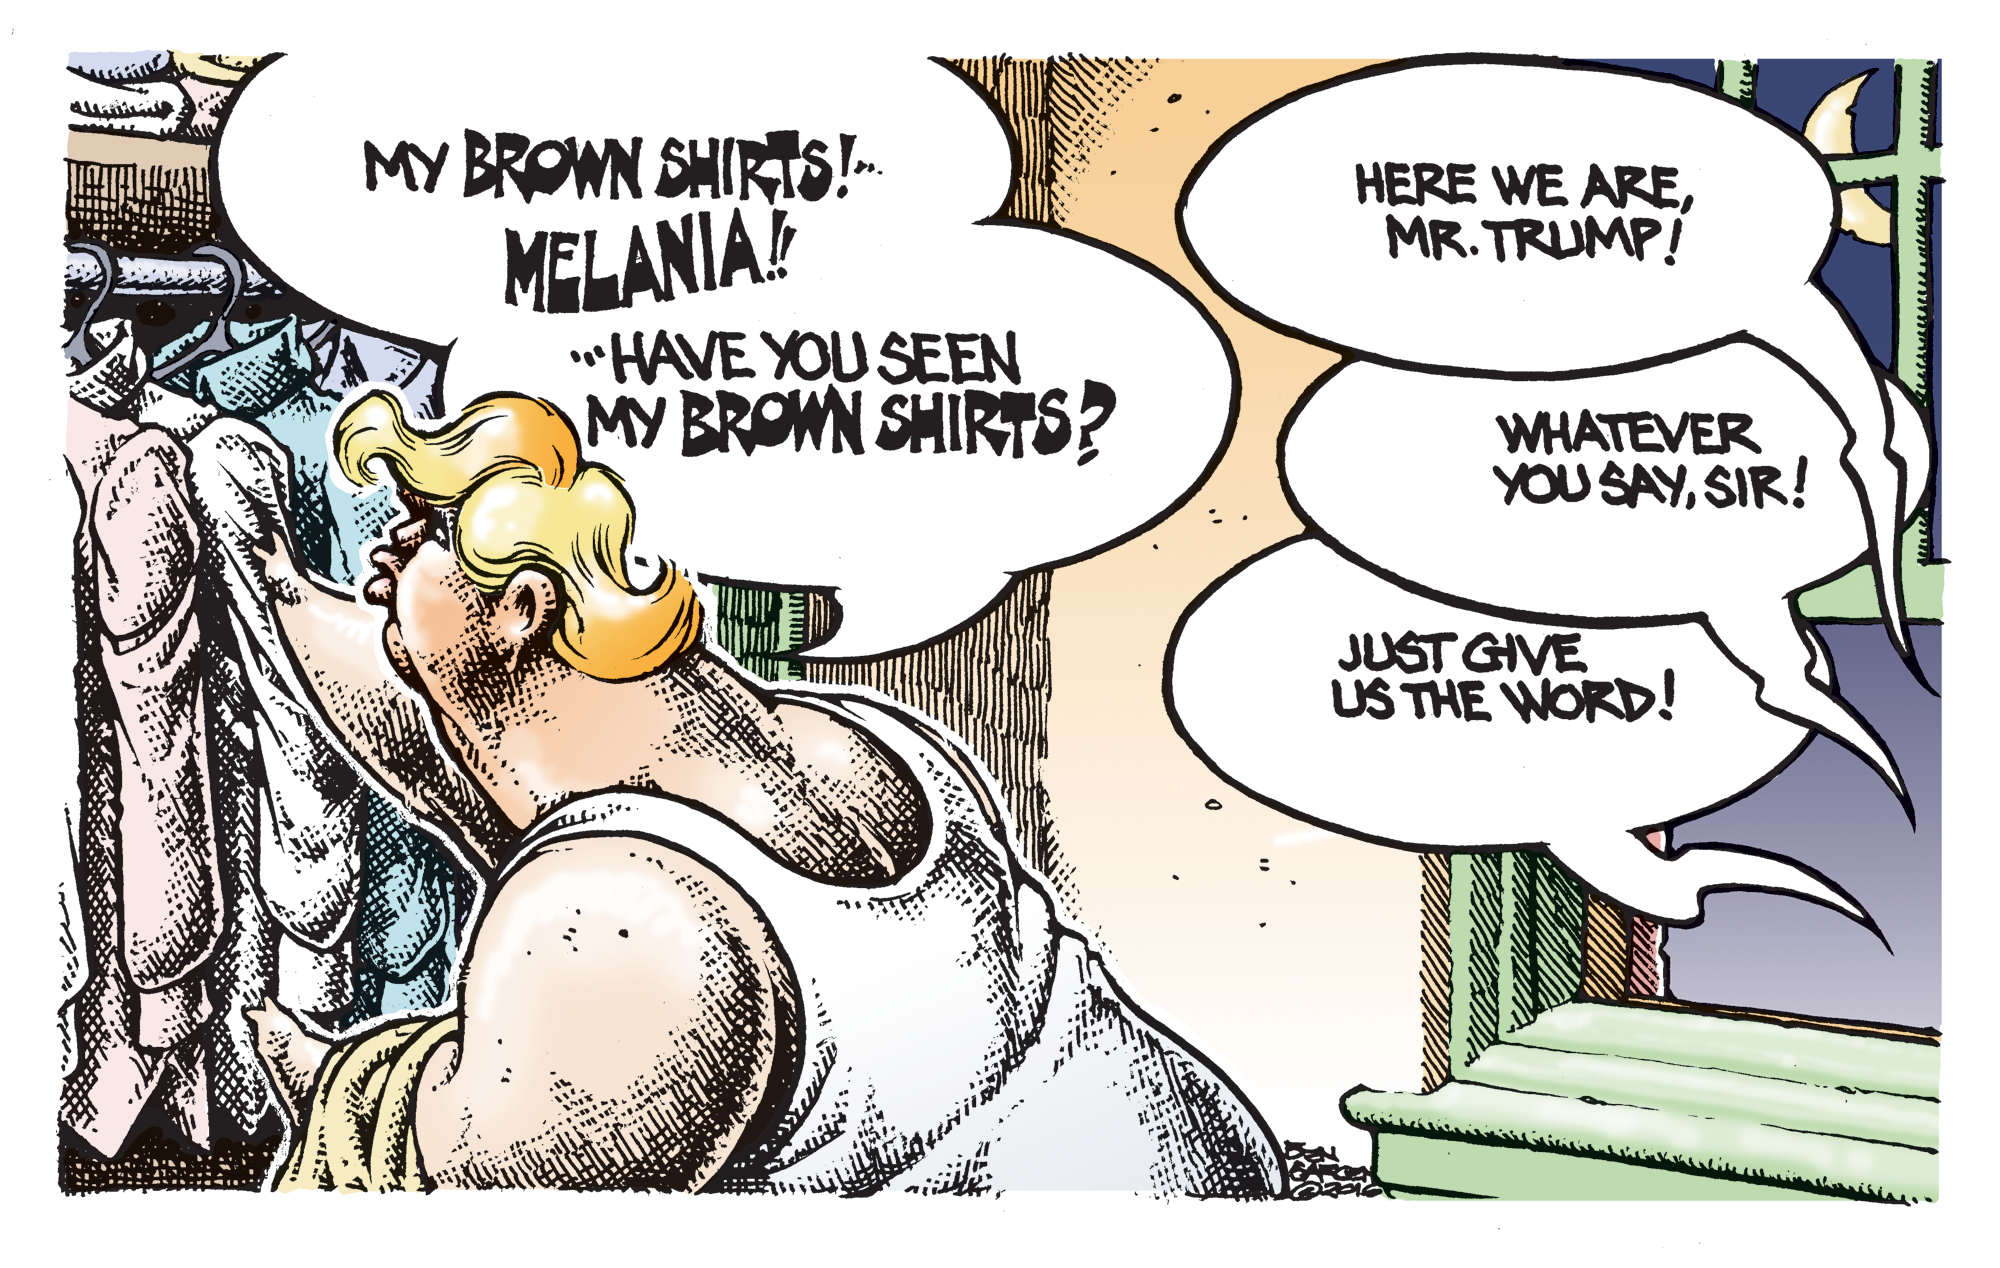 Donald Trump looks for his brown shirts.